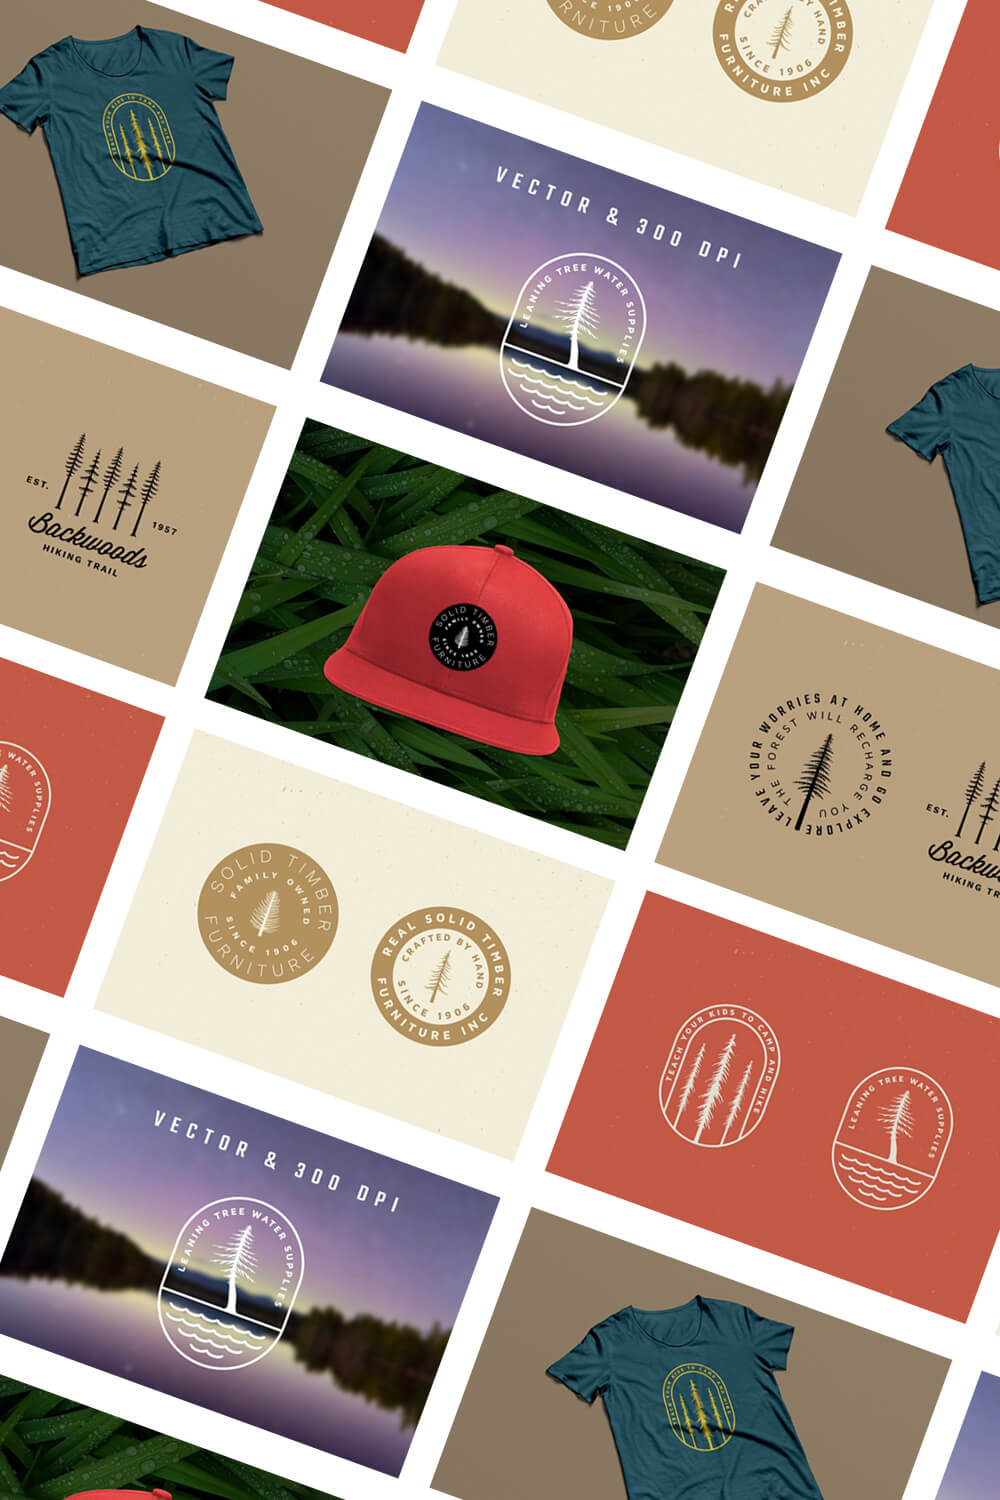 Round and oval logos with vintage trees and inscriptions on various merchandise, t-shirts, baseball caps.